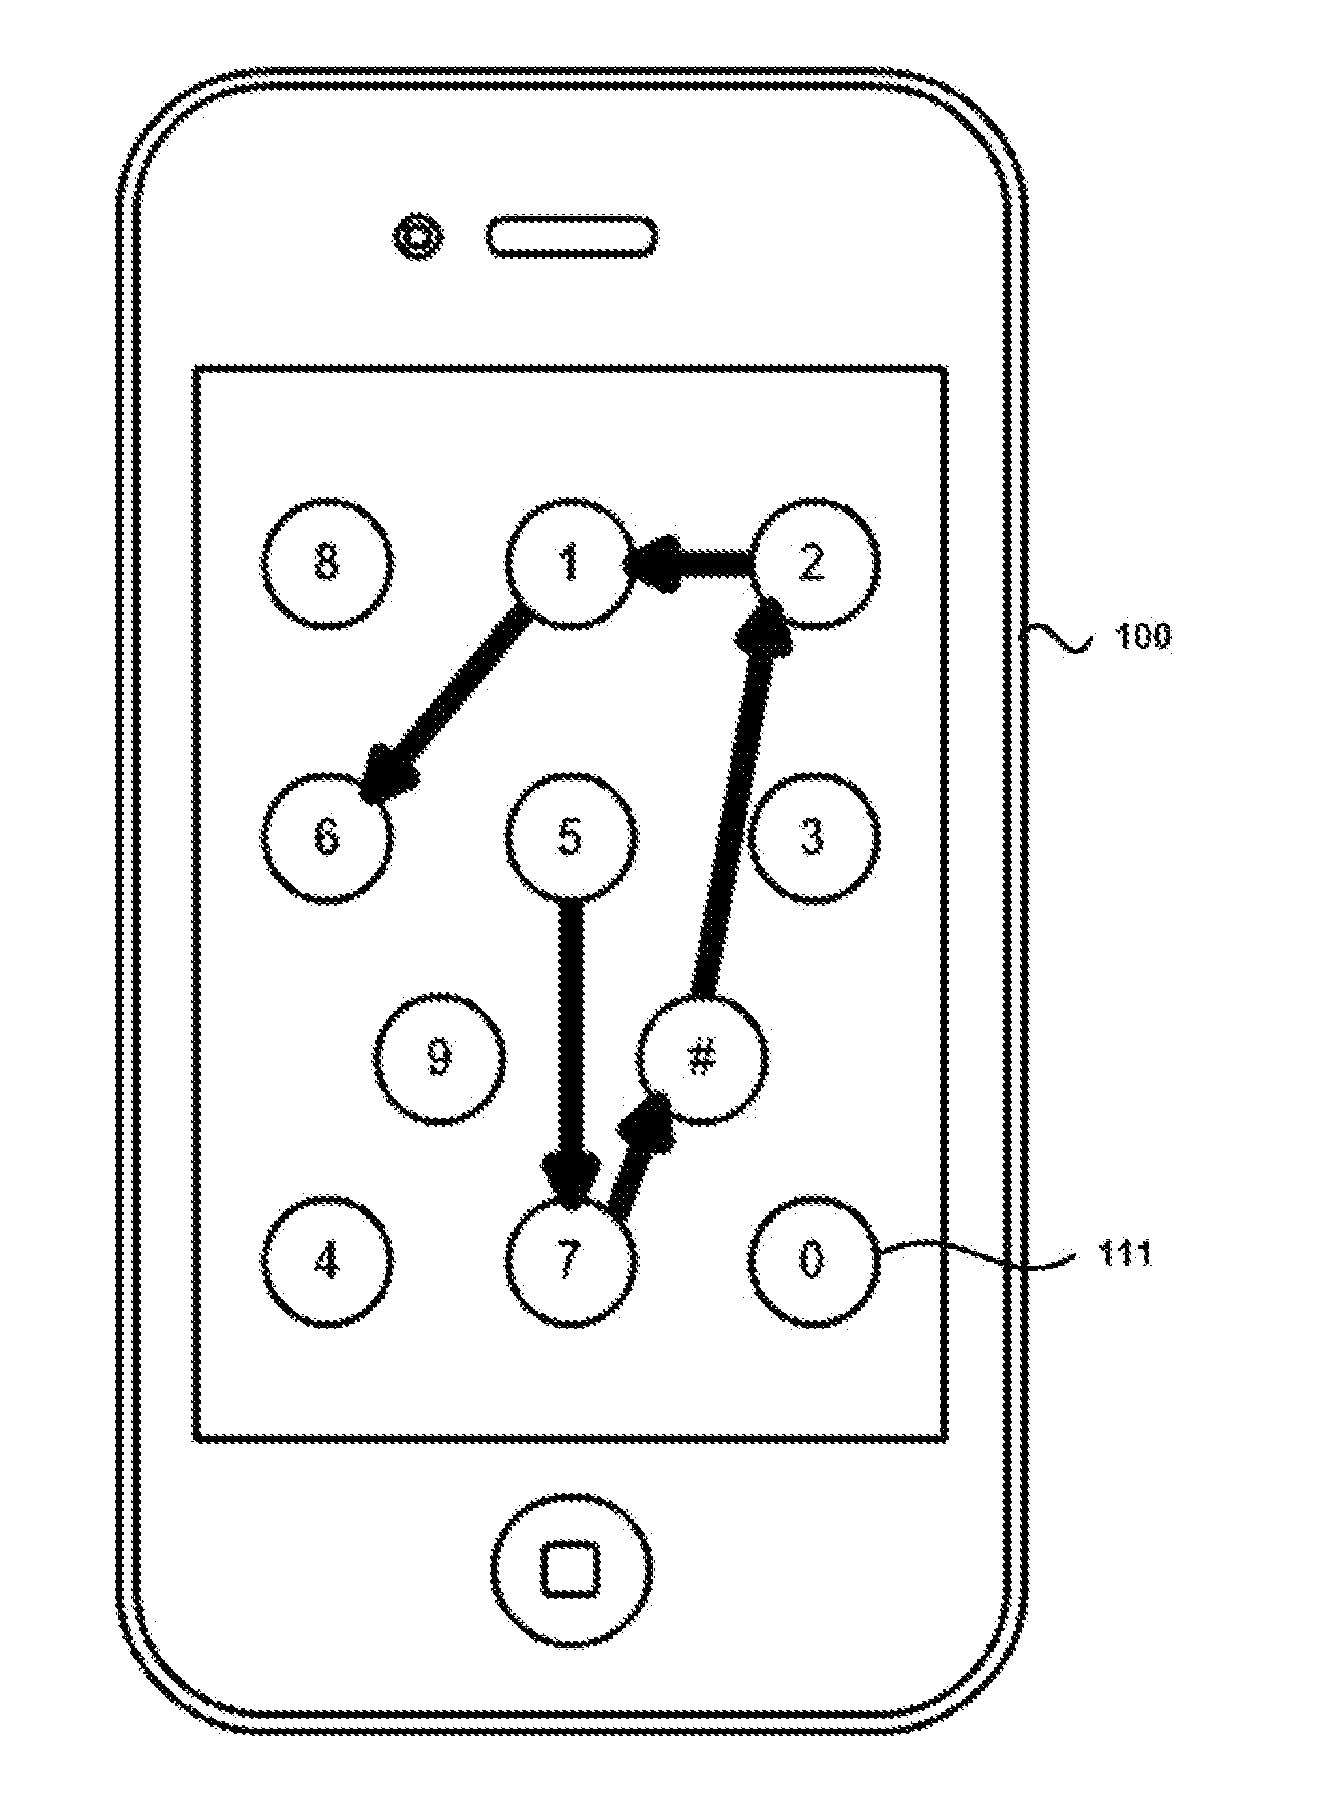 Method for inputting a password into an electronic terminal